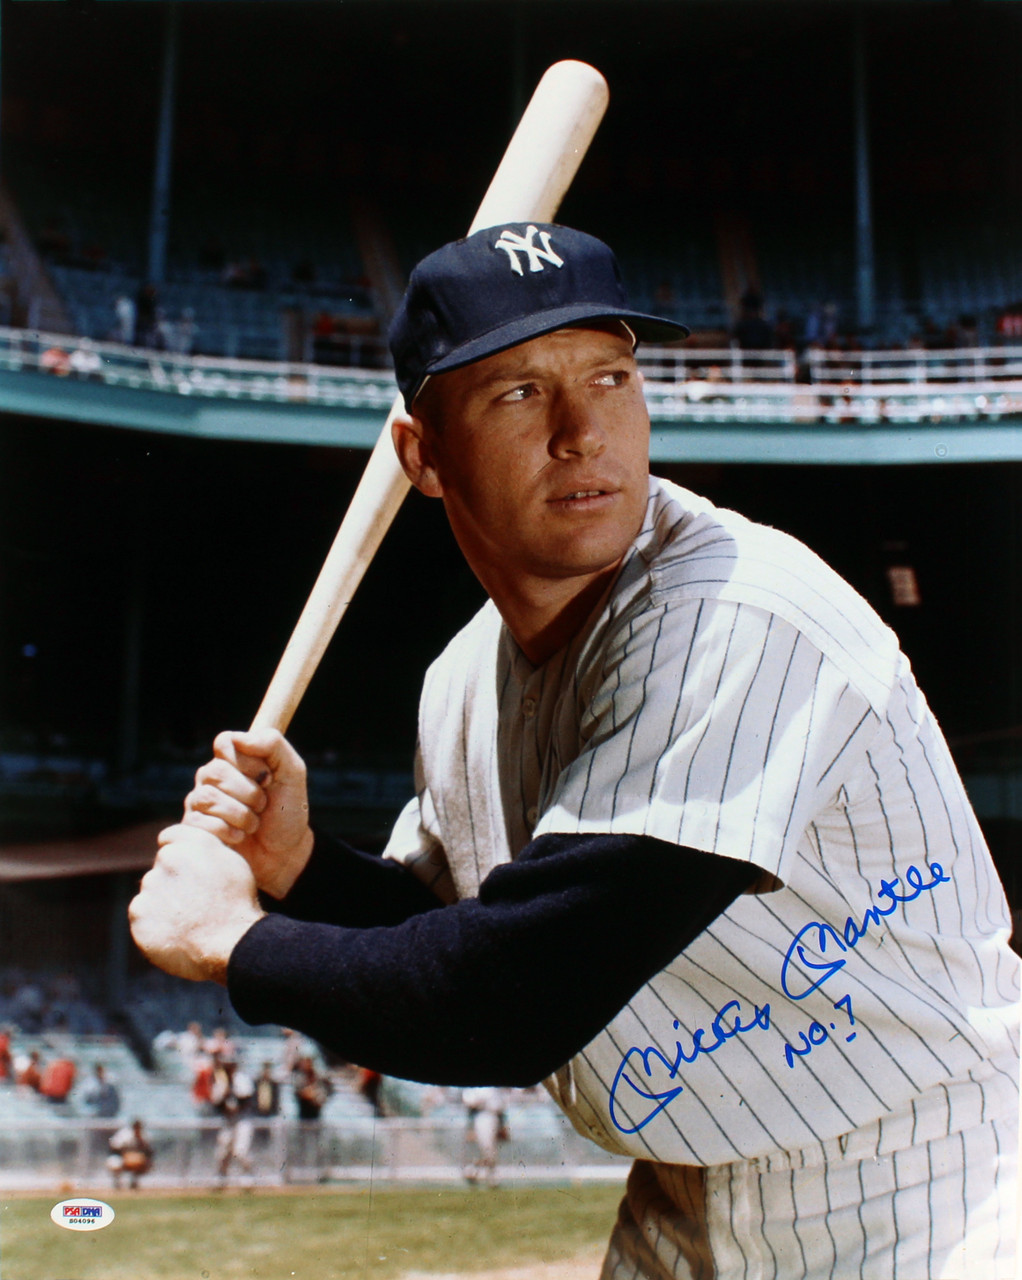 Yankees Mickey Mantle No. 7 Authentic Signed 16x20 Photo PSA/DNA #S04096